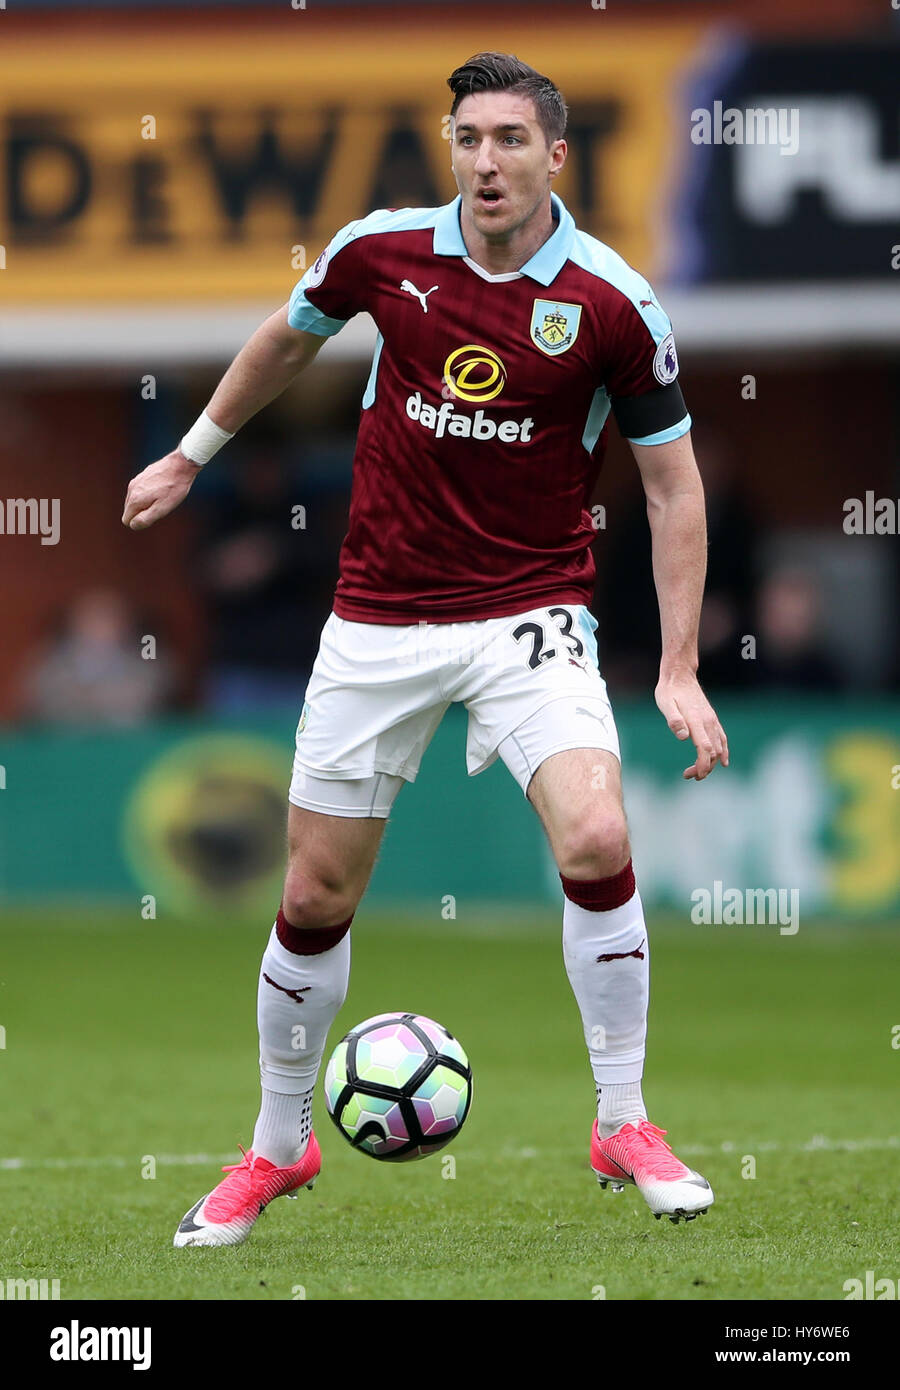 Burnley's Stephen Ward during the Premier League match at Turf Moor, Burnley. PRESS ASSOCIATION Photo. Picture date: Saturday April 1, 2017. See PA story SOCCER Burnley. Photo credit should read: Nick Potts/PA Wire. RESTRICTIONS: No use with unauthorised audio, video, data, fixture lists, club/league logos or 'live' services. Online in-match use limited to 75 images, no video emulation. No use in betting, games or single club/league/player publications. Stock Photo